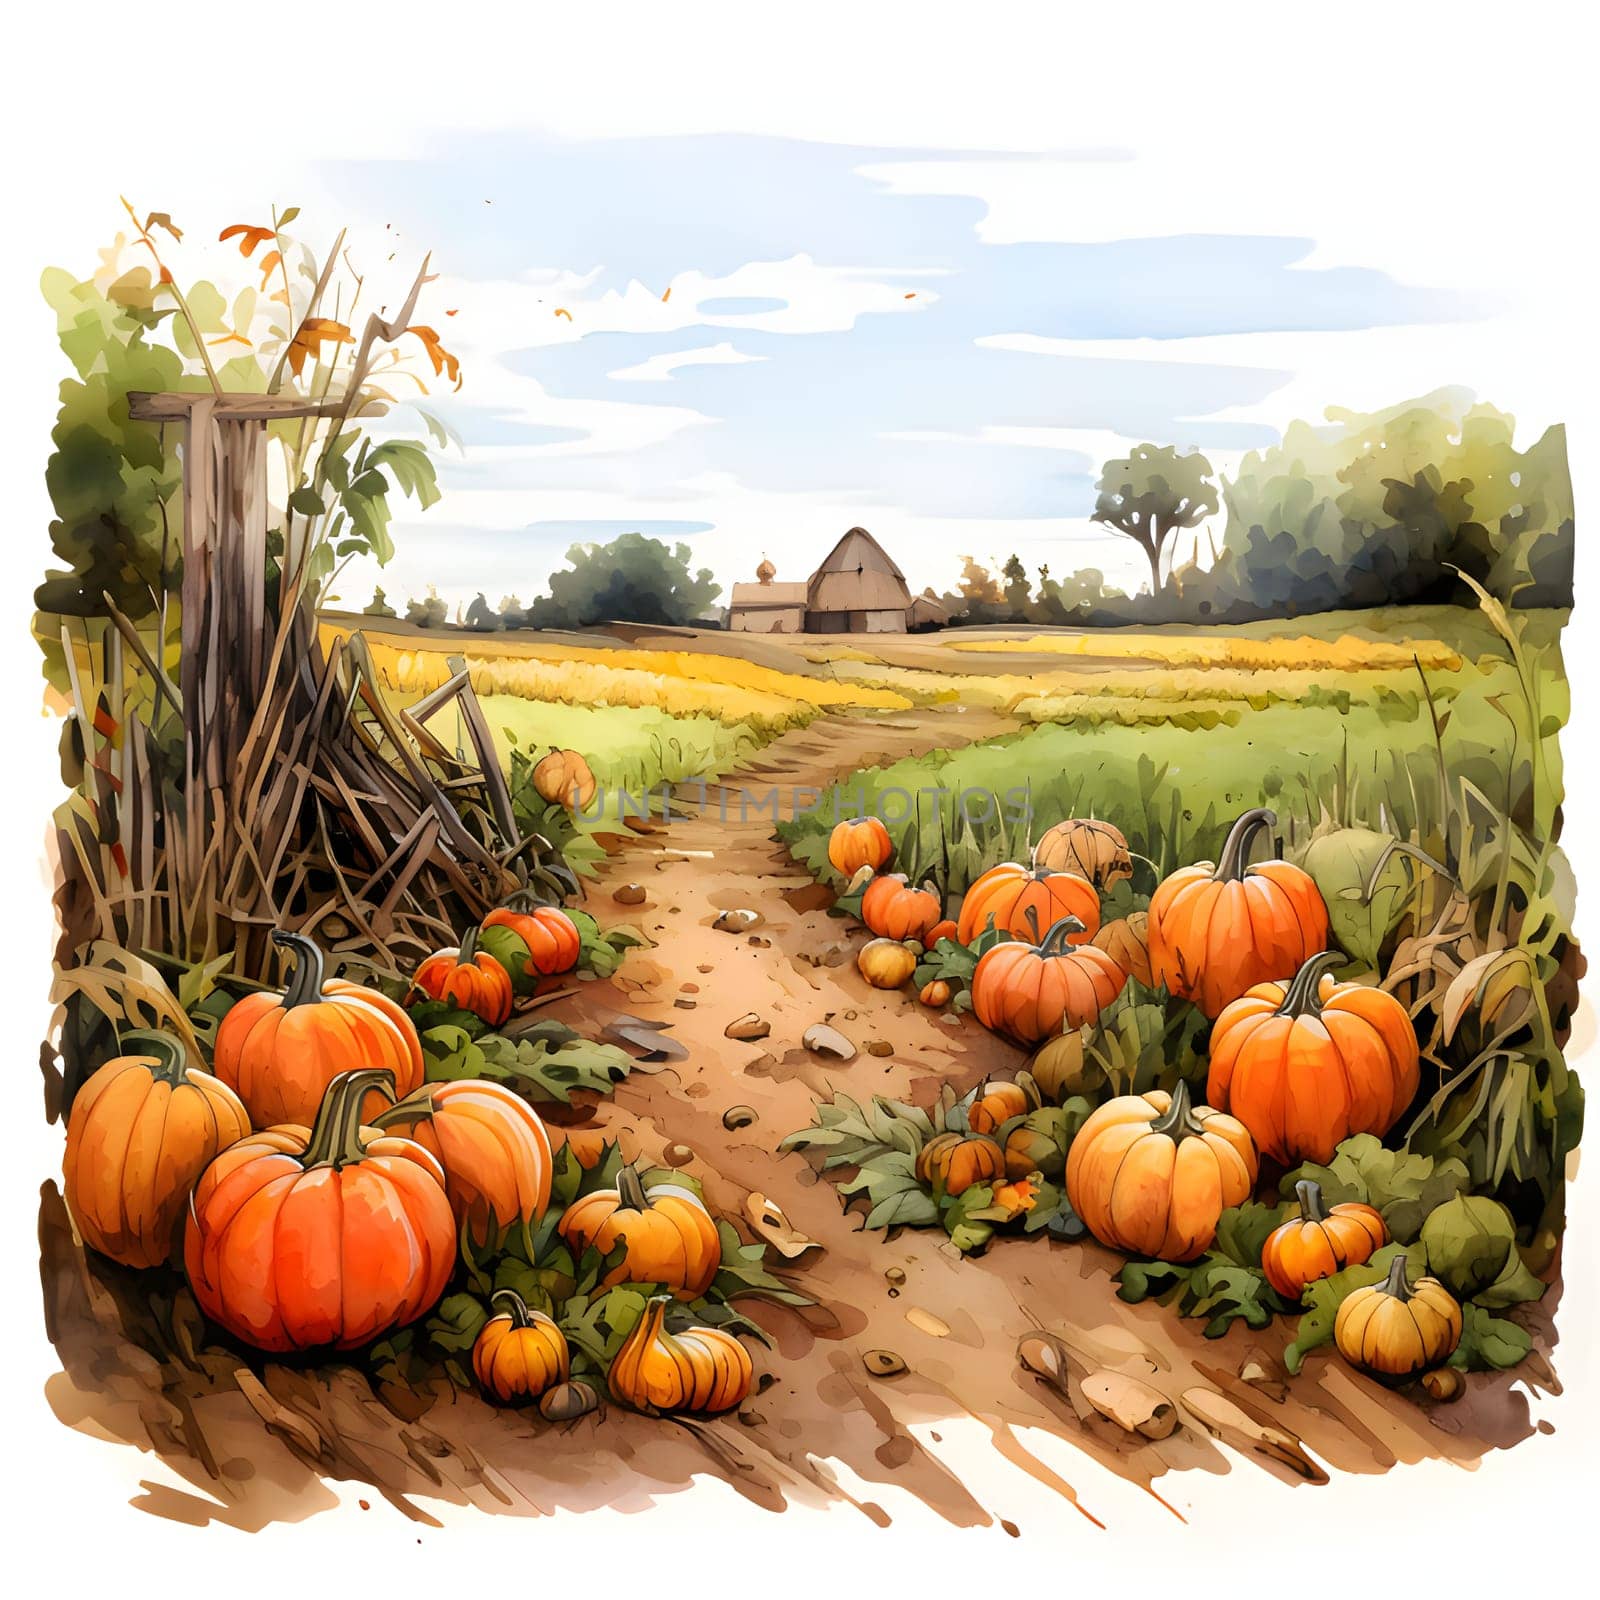 Painted illustration of pumpkins and a field in the background. Pumpkin as a dish of thanksgiving for the harvest. by ThemesS